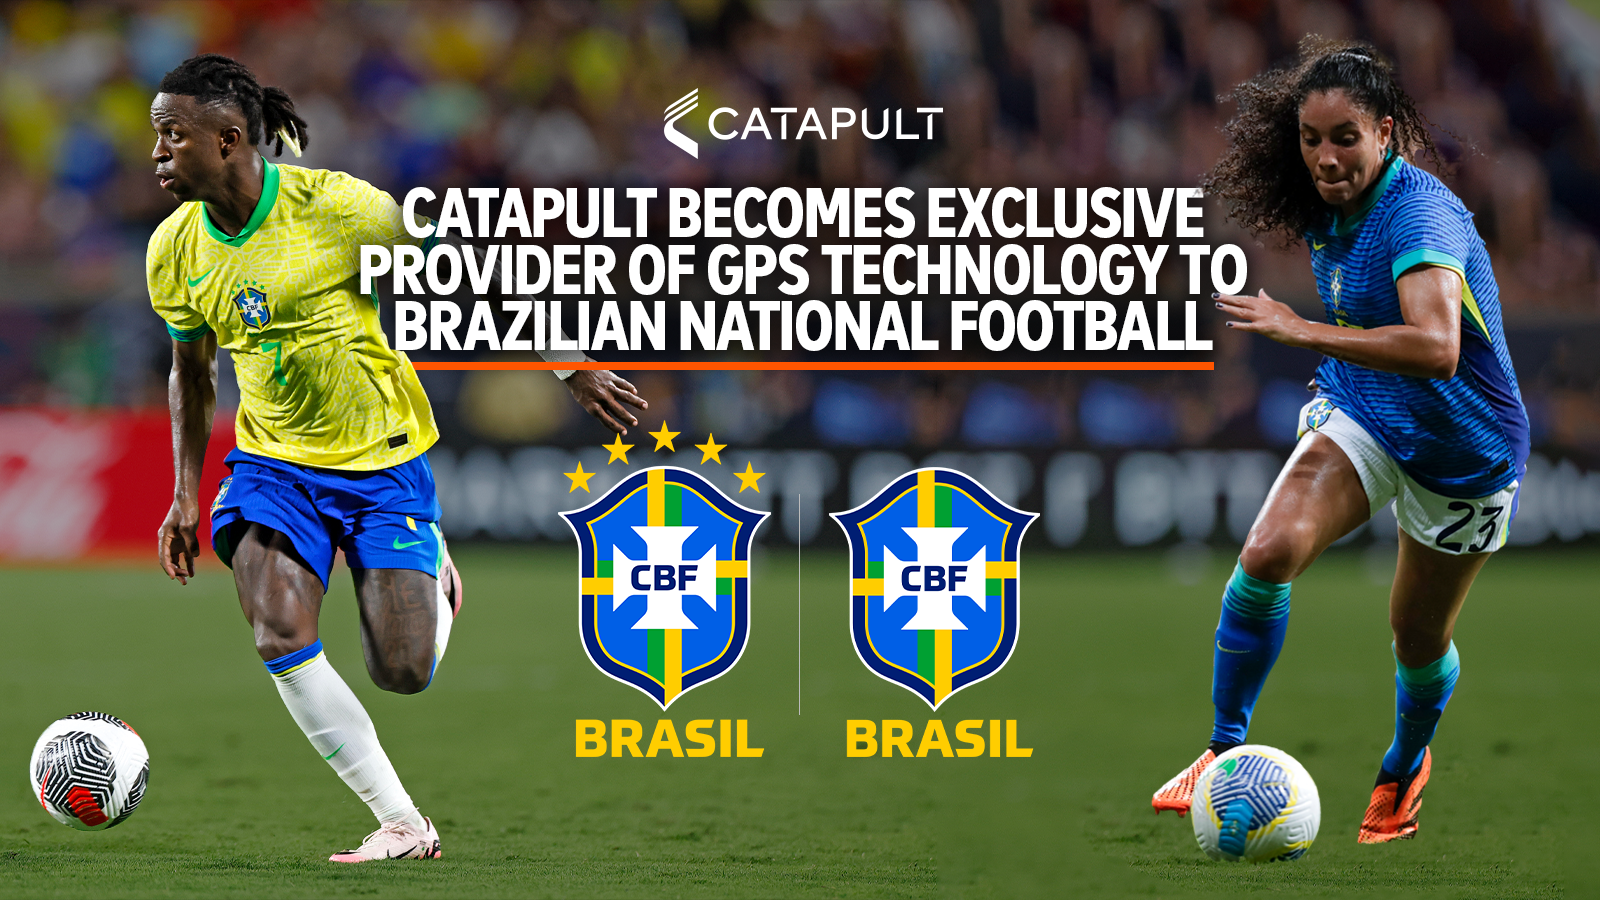 Catapult Becomes Exclusive Provider To Brazilian National Football Teams 